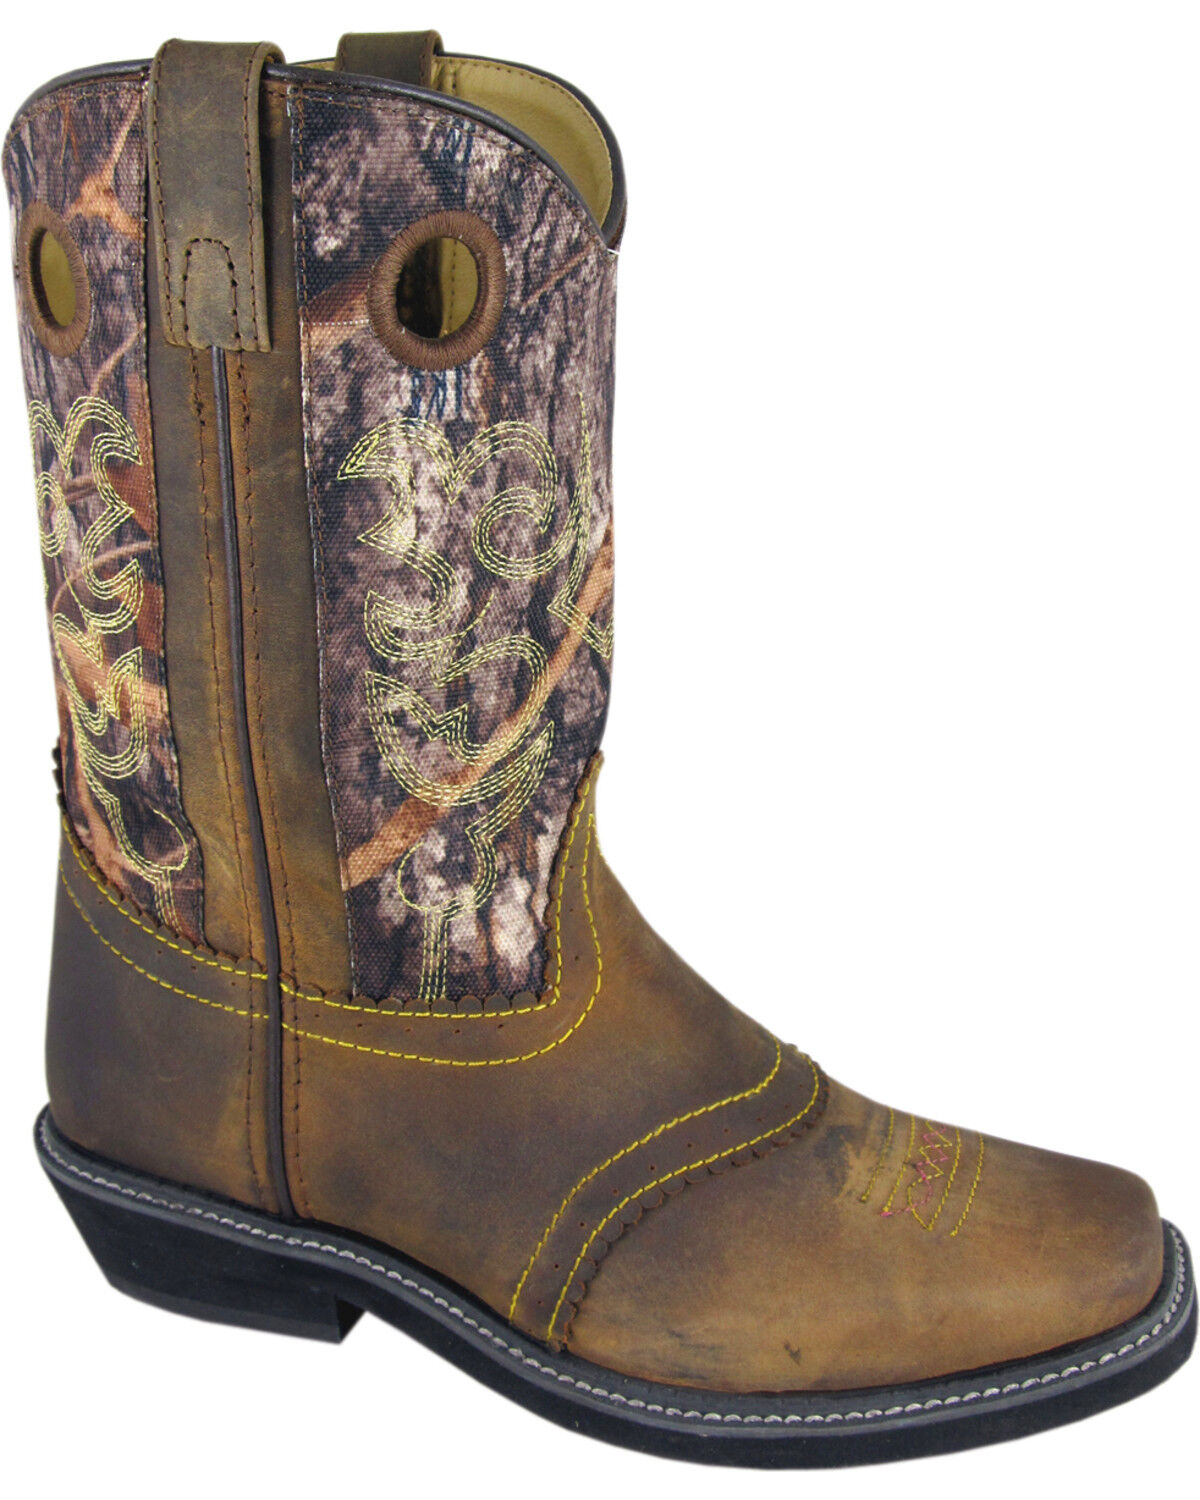 Women's Camouflage Cowboy Boots - Boot Barn